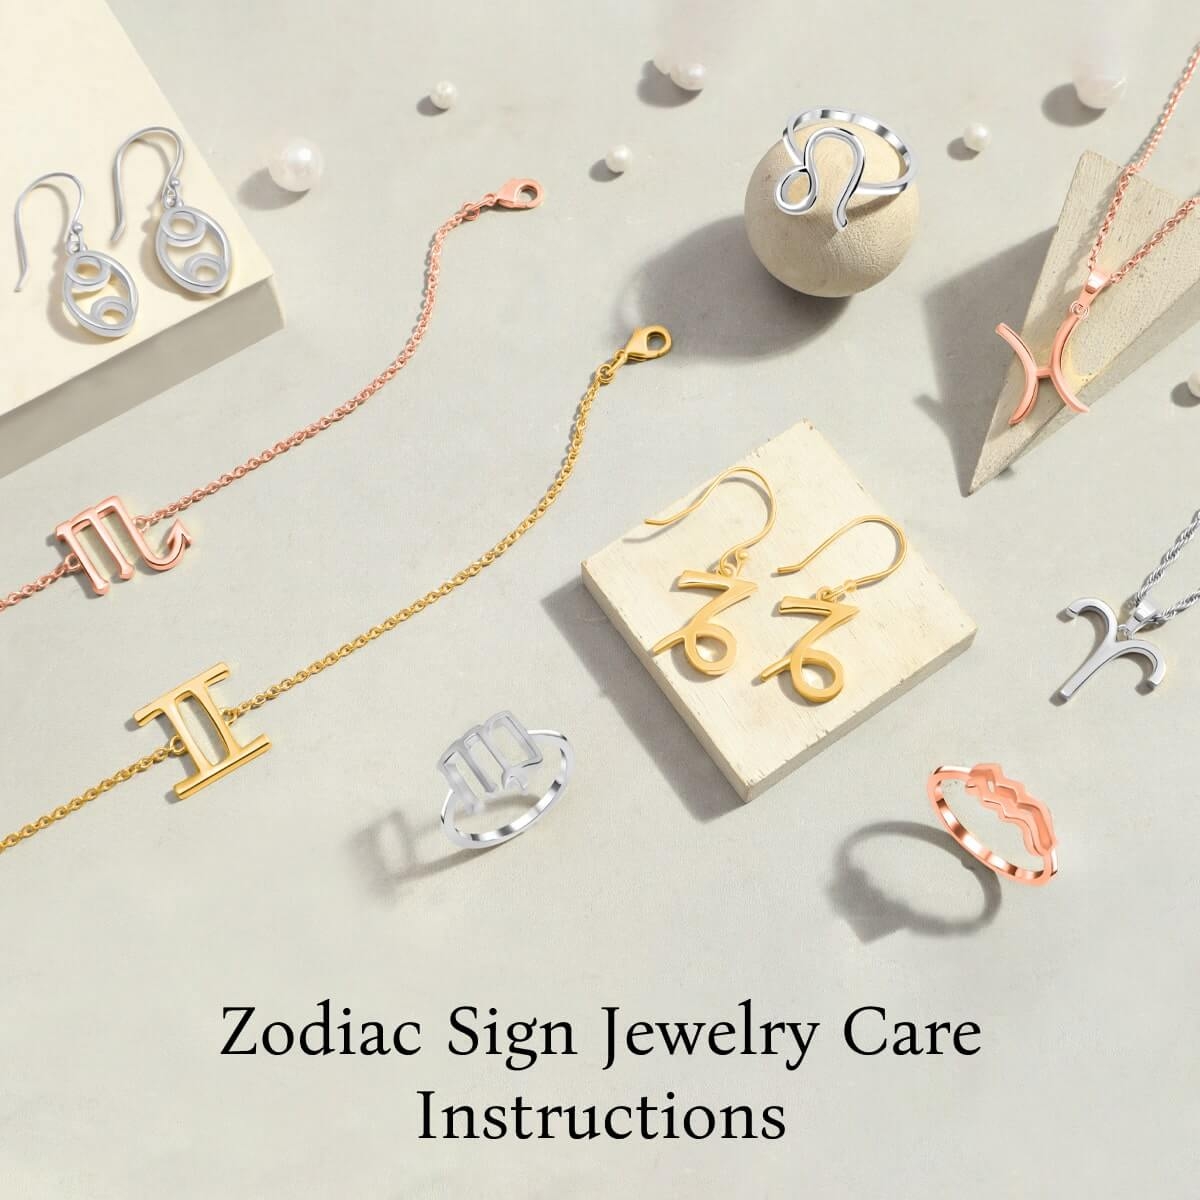 How to Take Care of Silver Zodiac Sign Jewelry